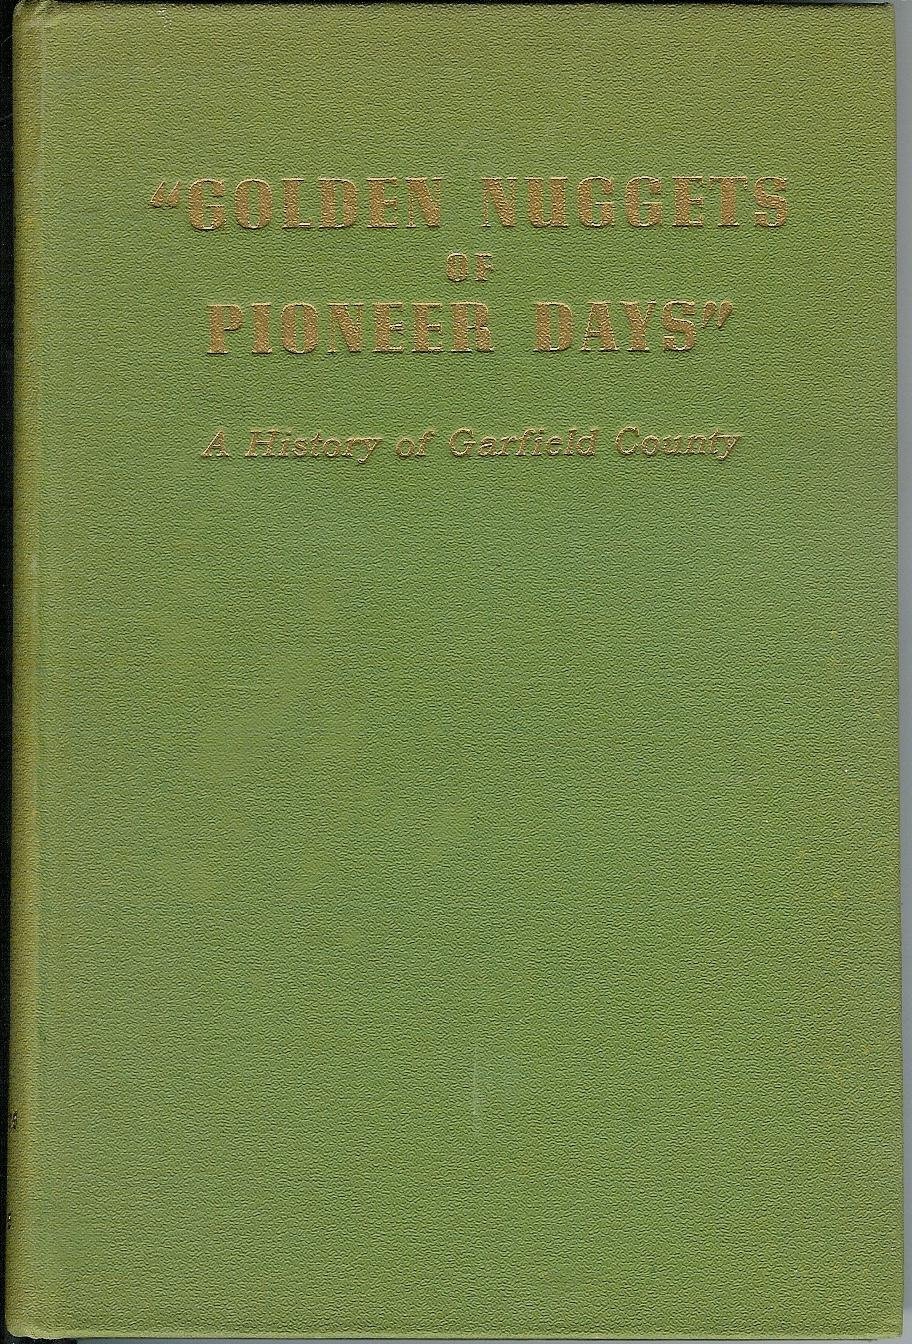 Image for Golden Nuggets of Pioneer Days A History of Garfield County